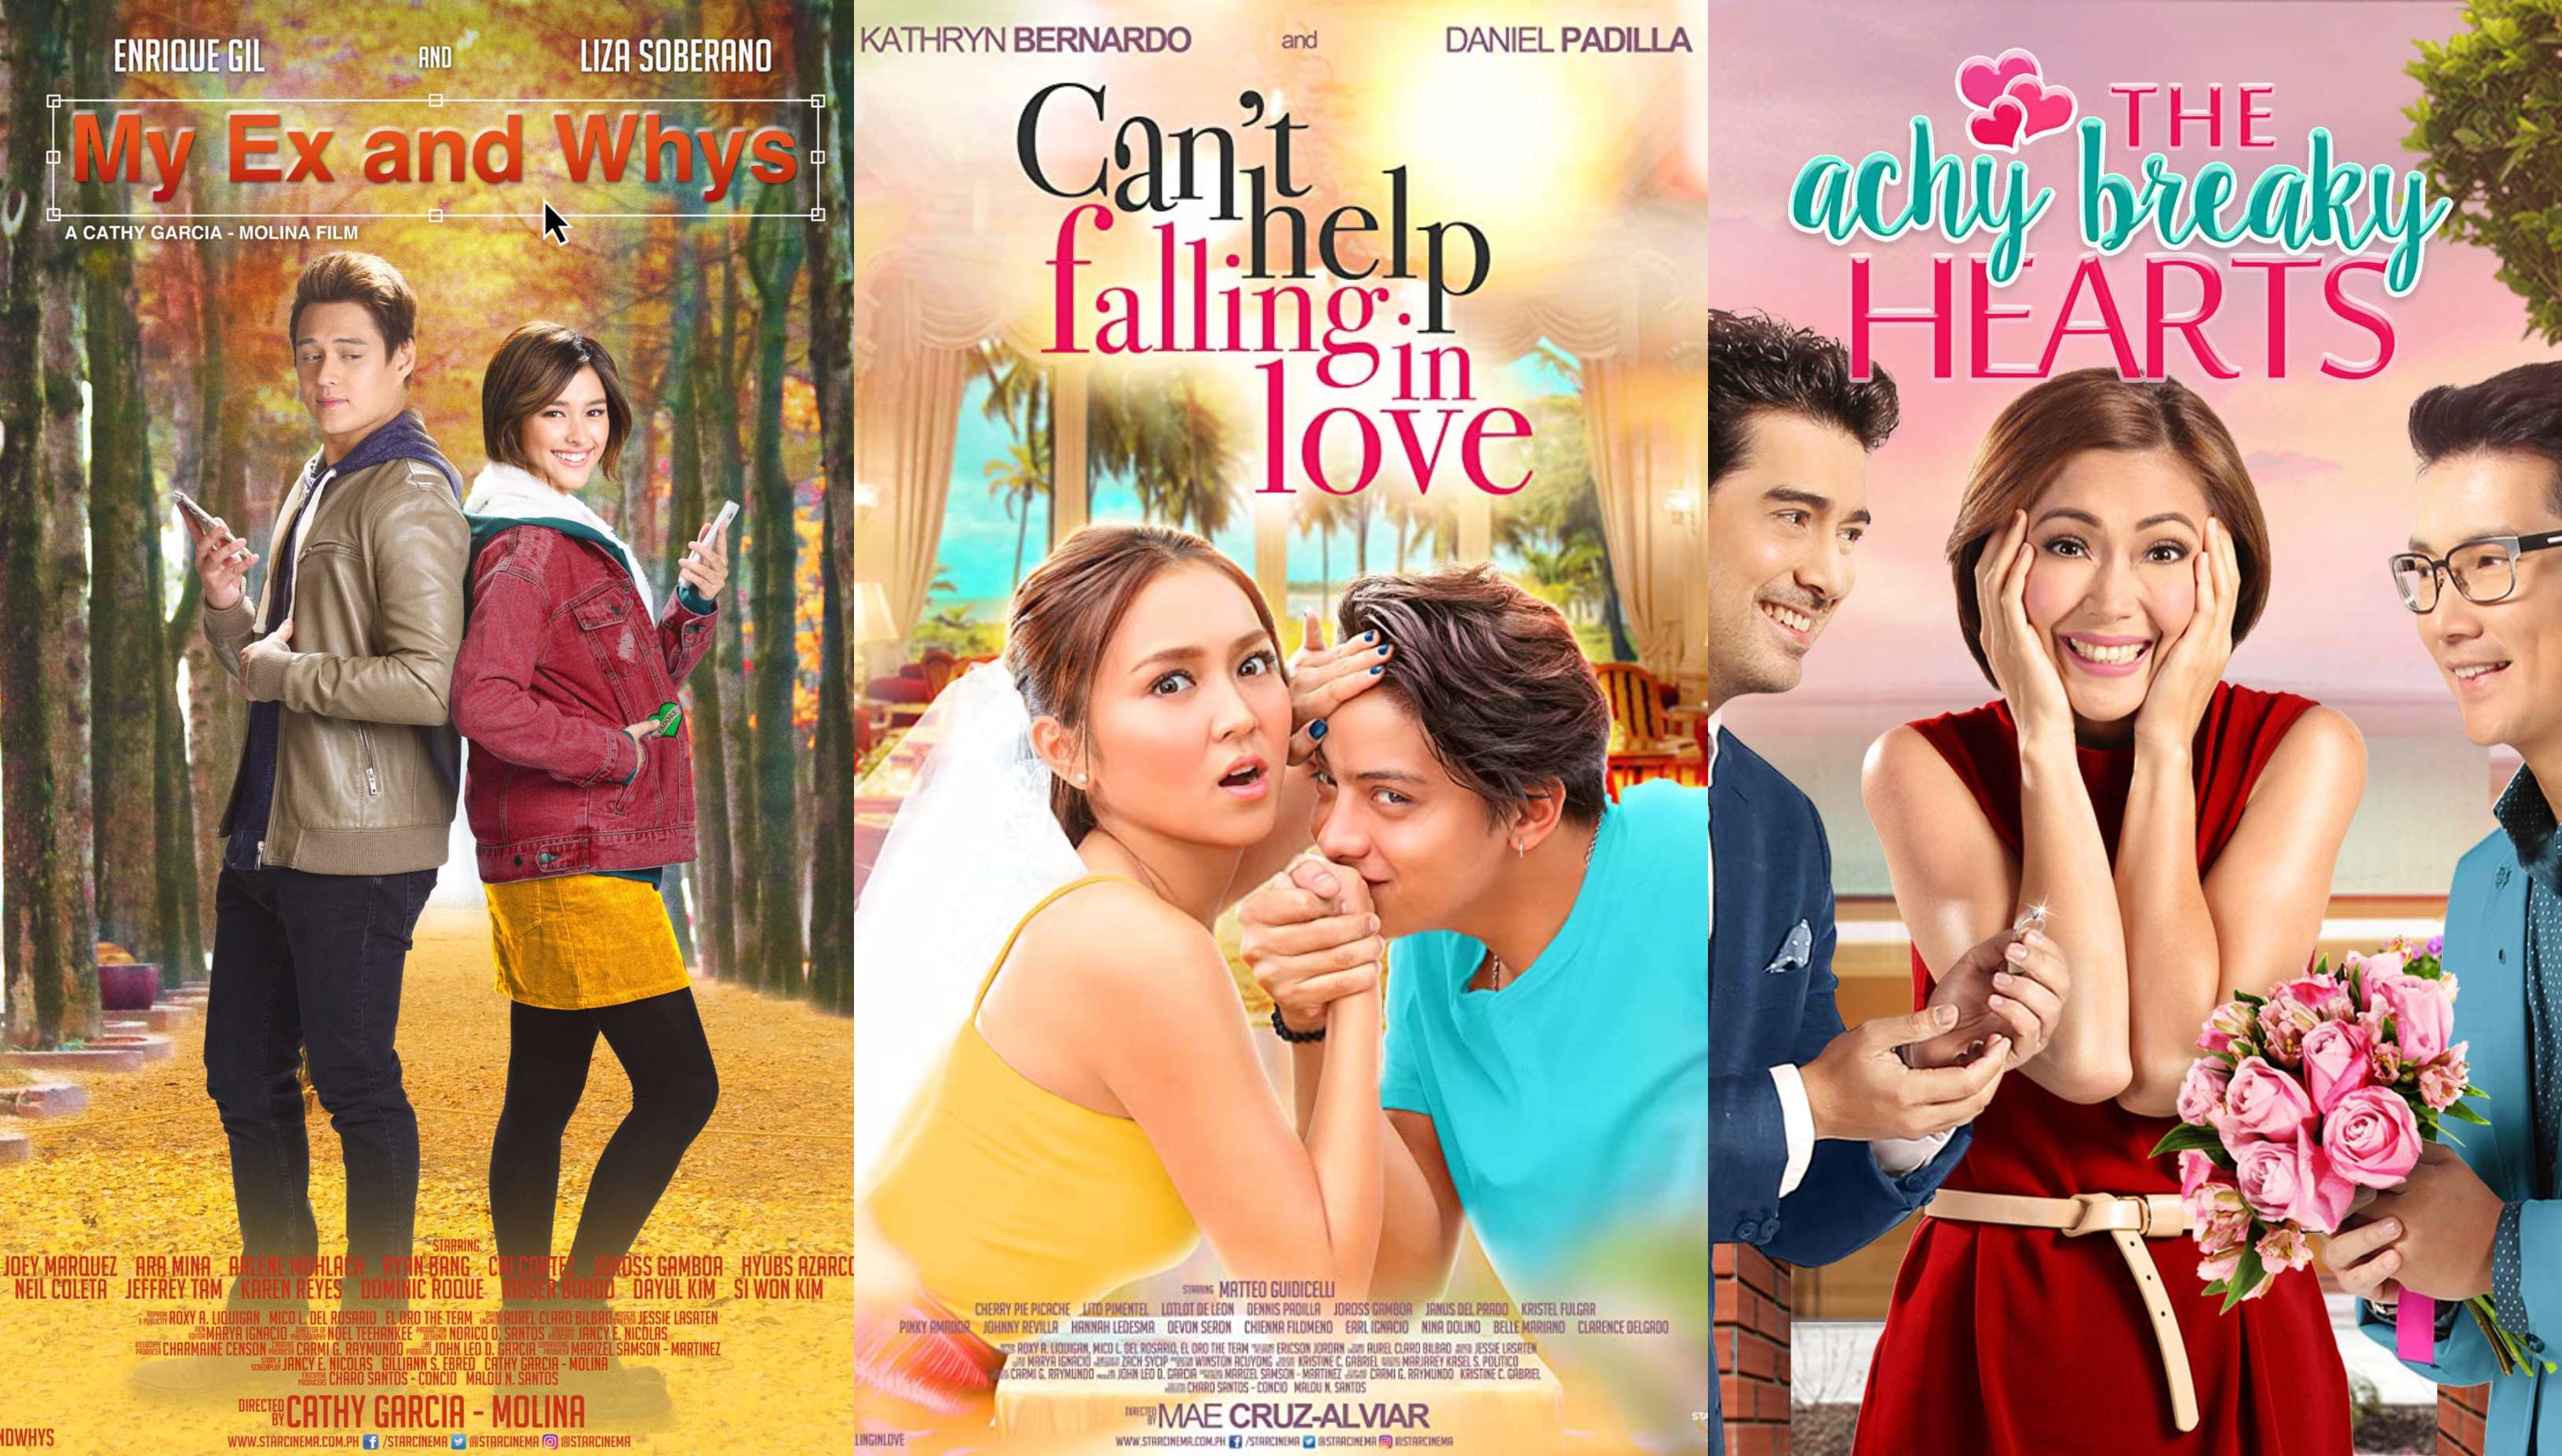 ABS-CBN's blockbuster films premier on China cable TV